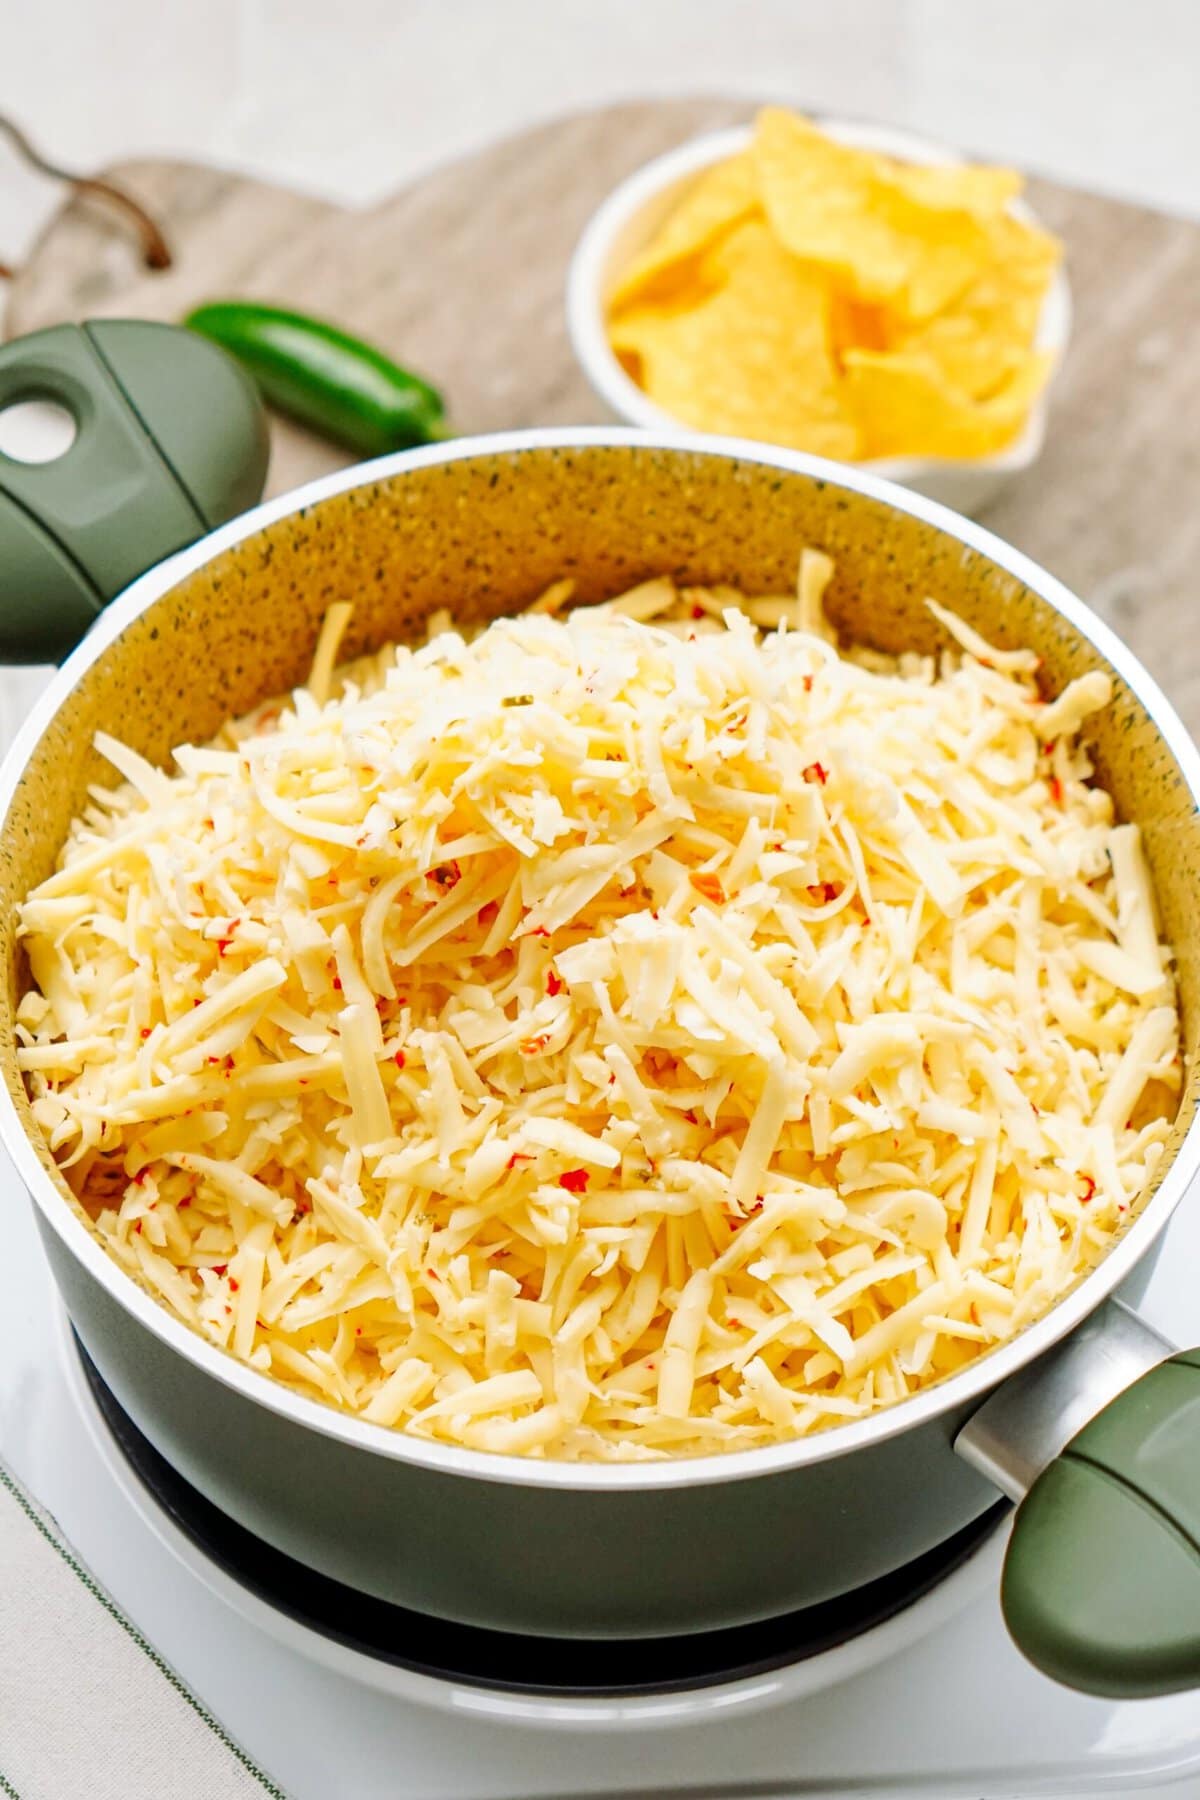 A pot filled with shredded cheese, ready to become a delicious queso dip, is placed on an electric stovetop. In the background, a bowl of tortilla chips is slightly blurred.